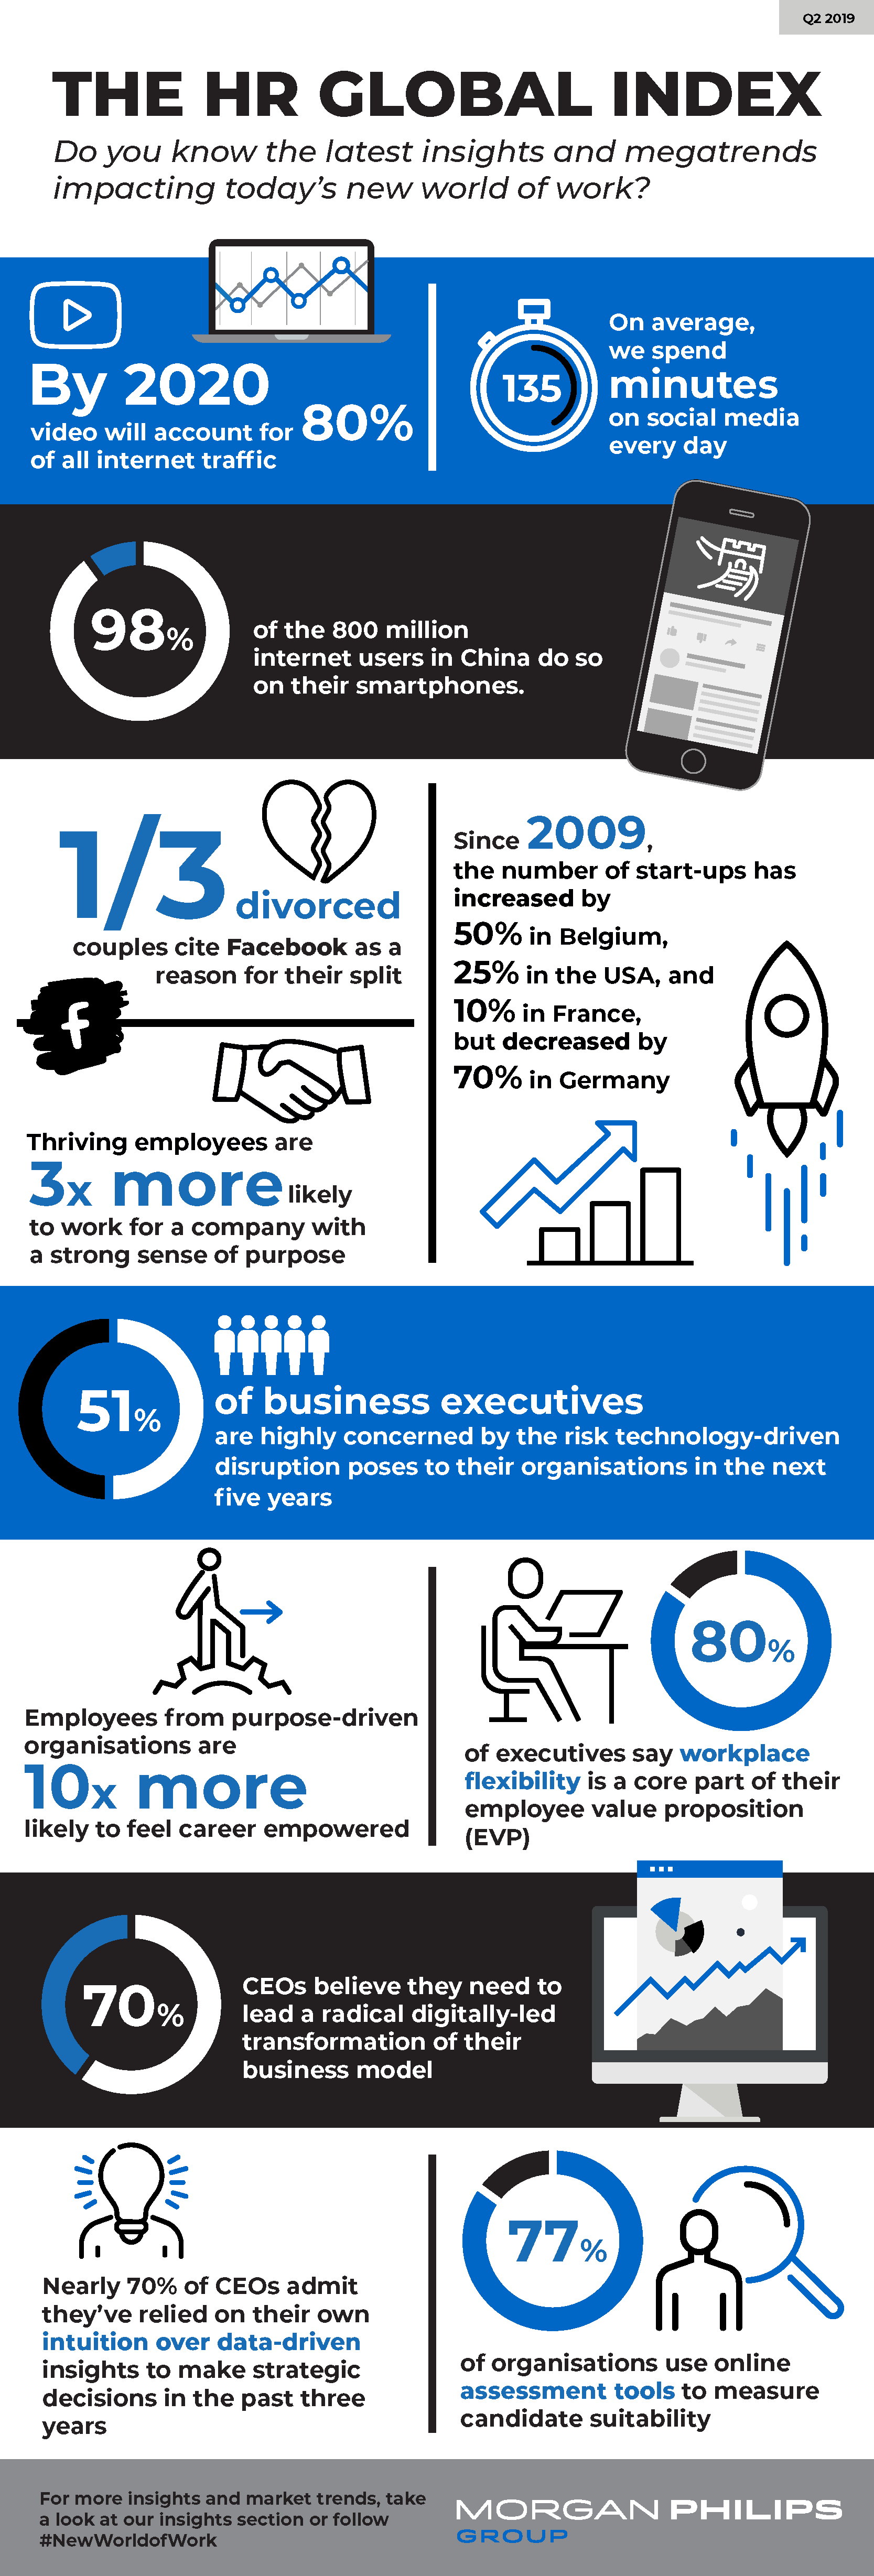 HR trends infographic